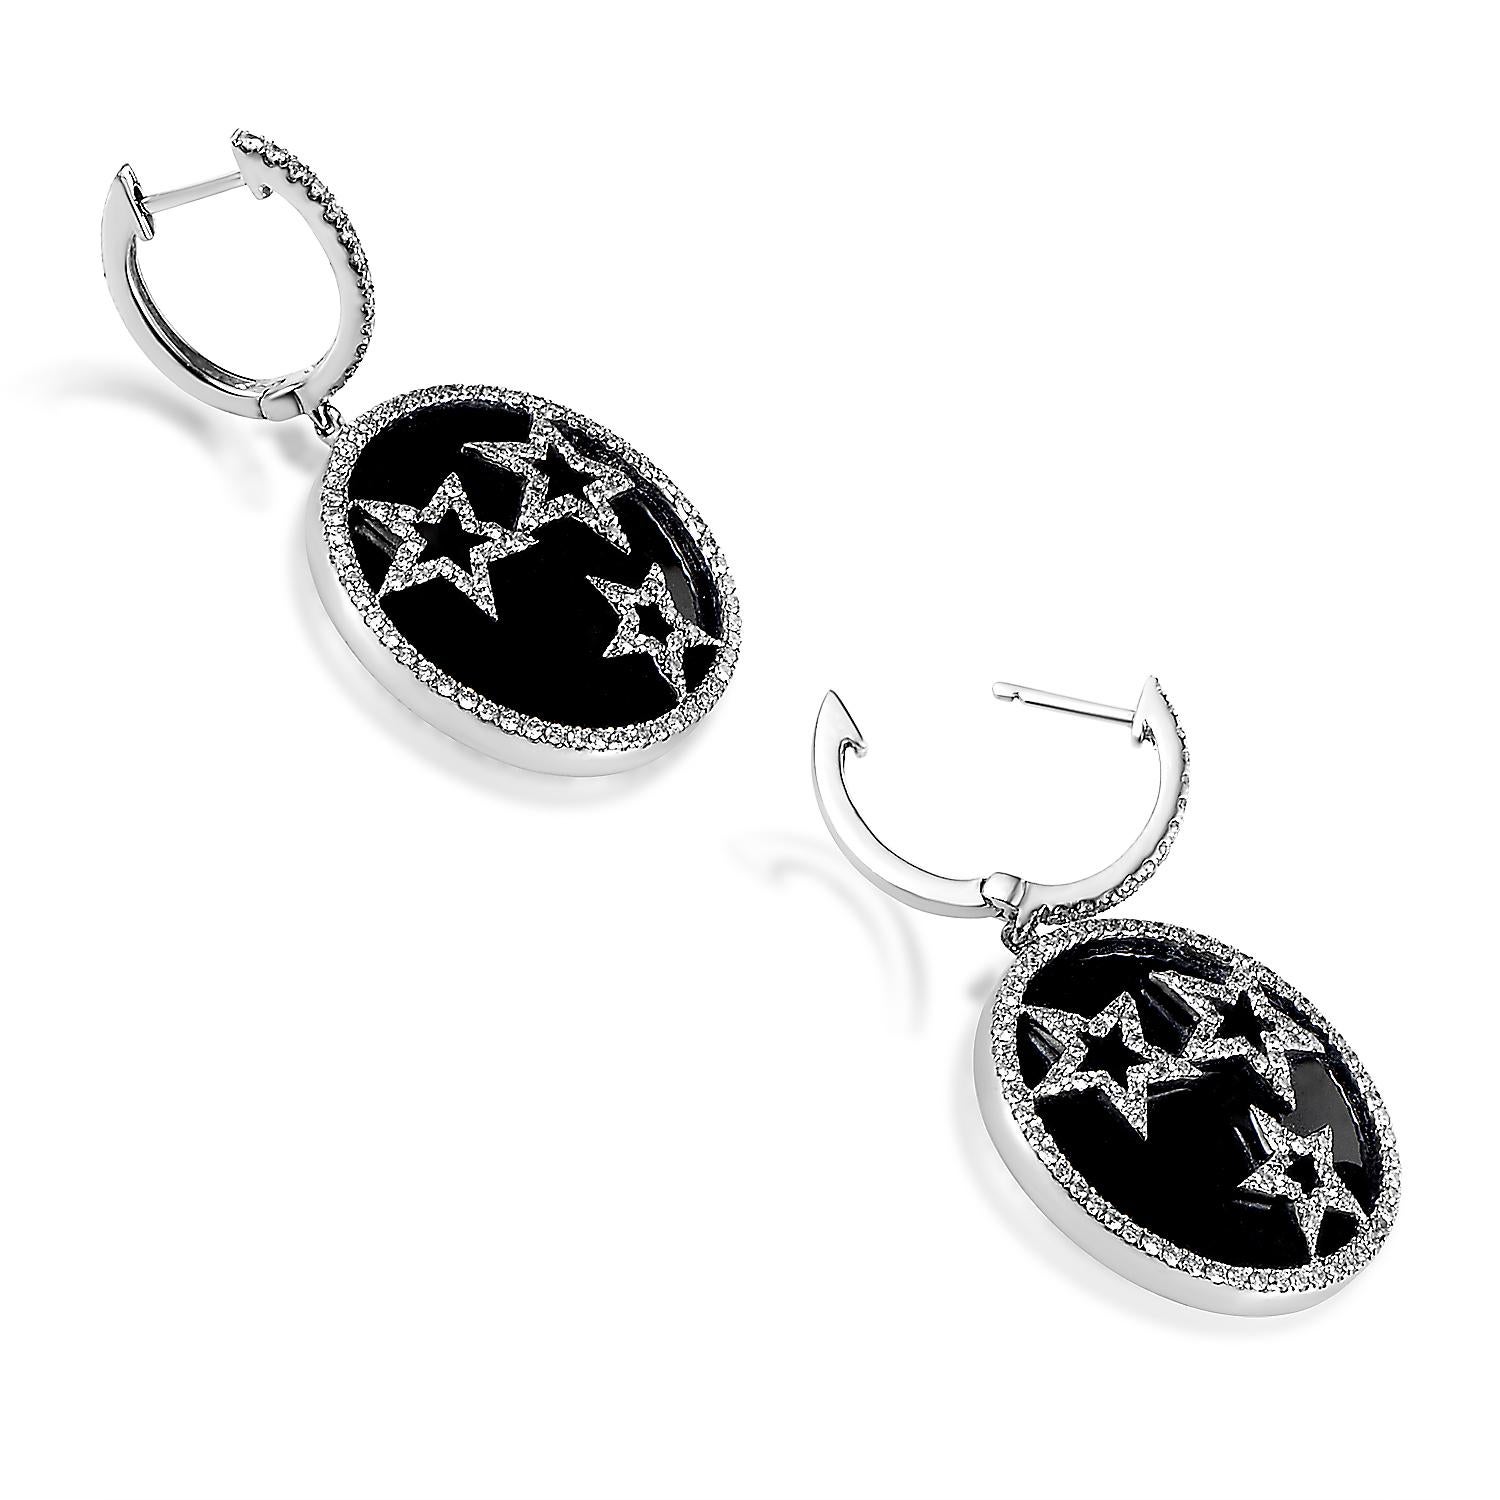 Playful yet elegant, these diamond earrings are perfect for a refined woman who knows how to have a good time. These 18K white gold earrings suspend a sleek black stone that provides the perfect contrast for pave set diamonds that encircle it and